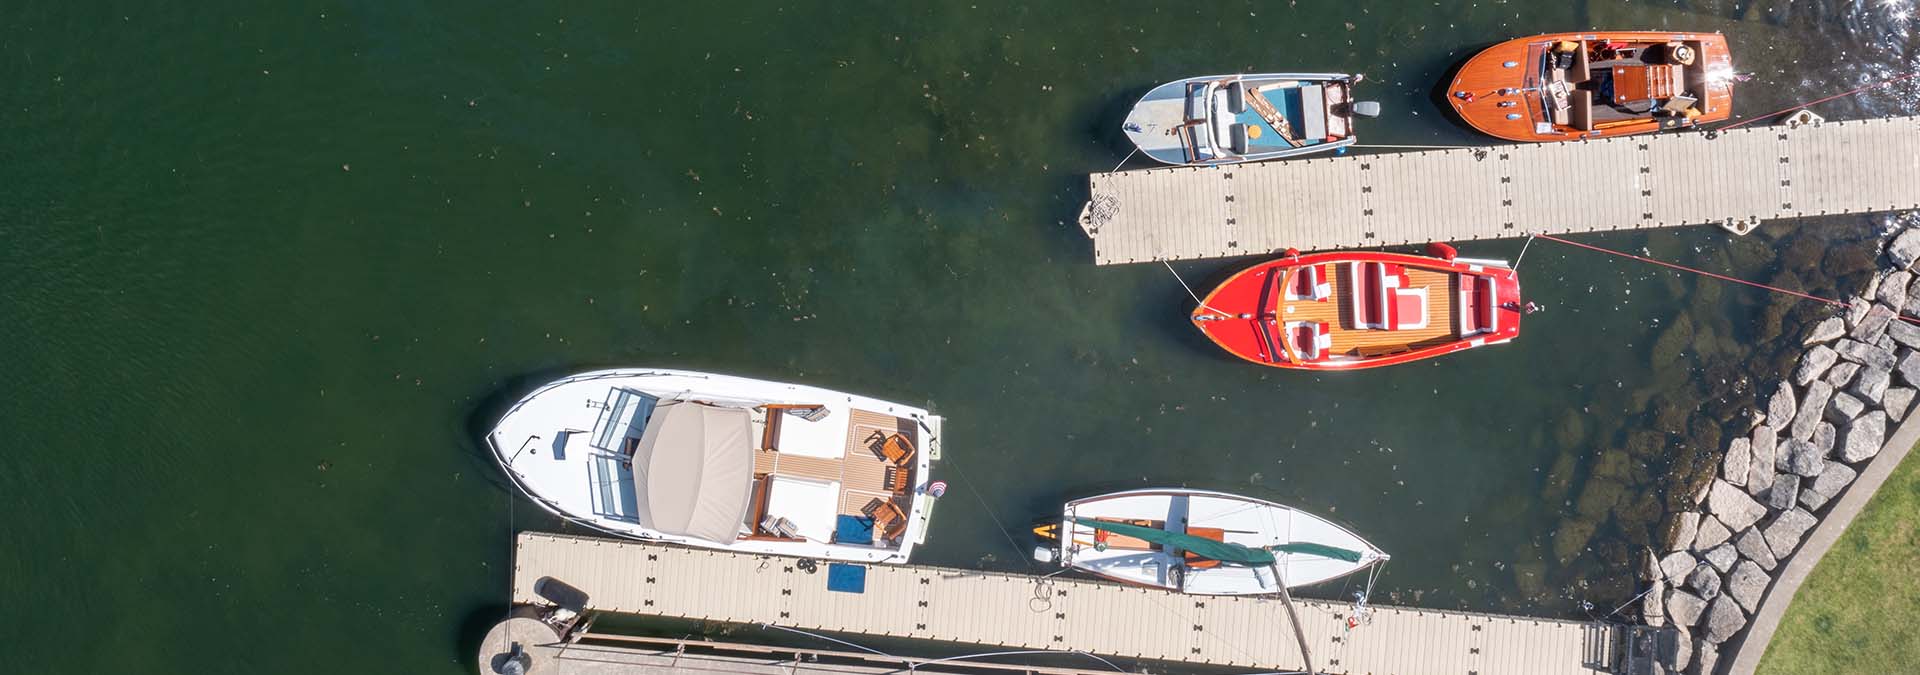 Aerial view of boats docked near a pier